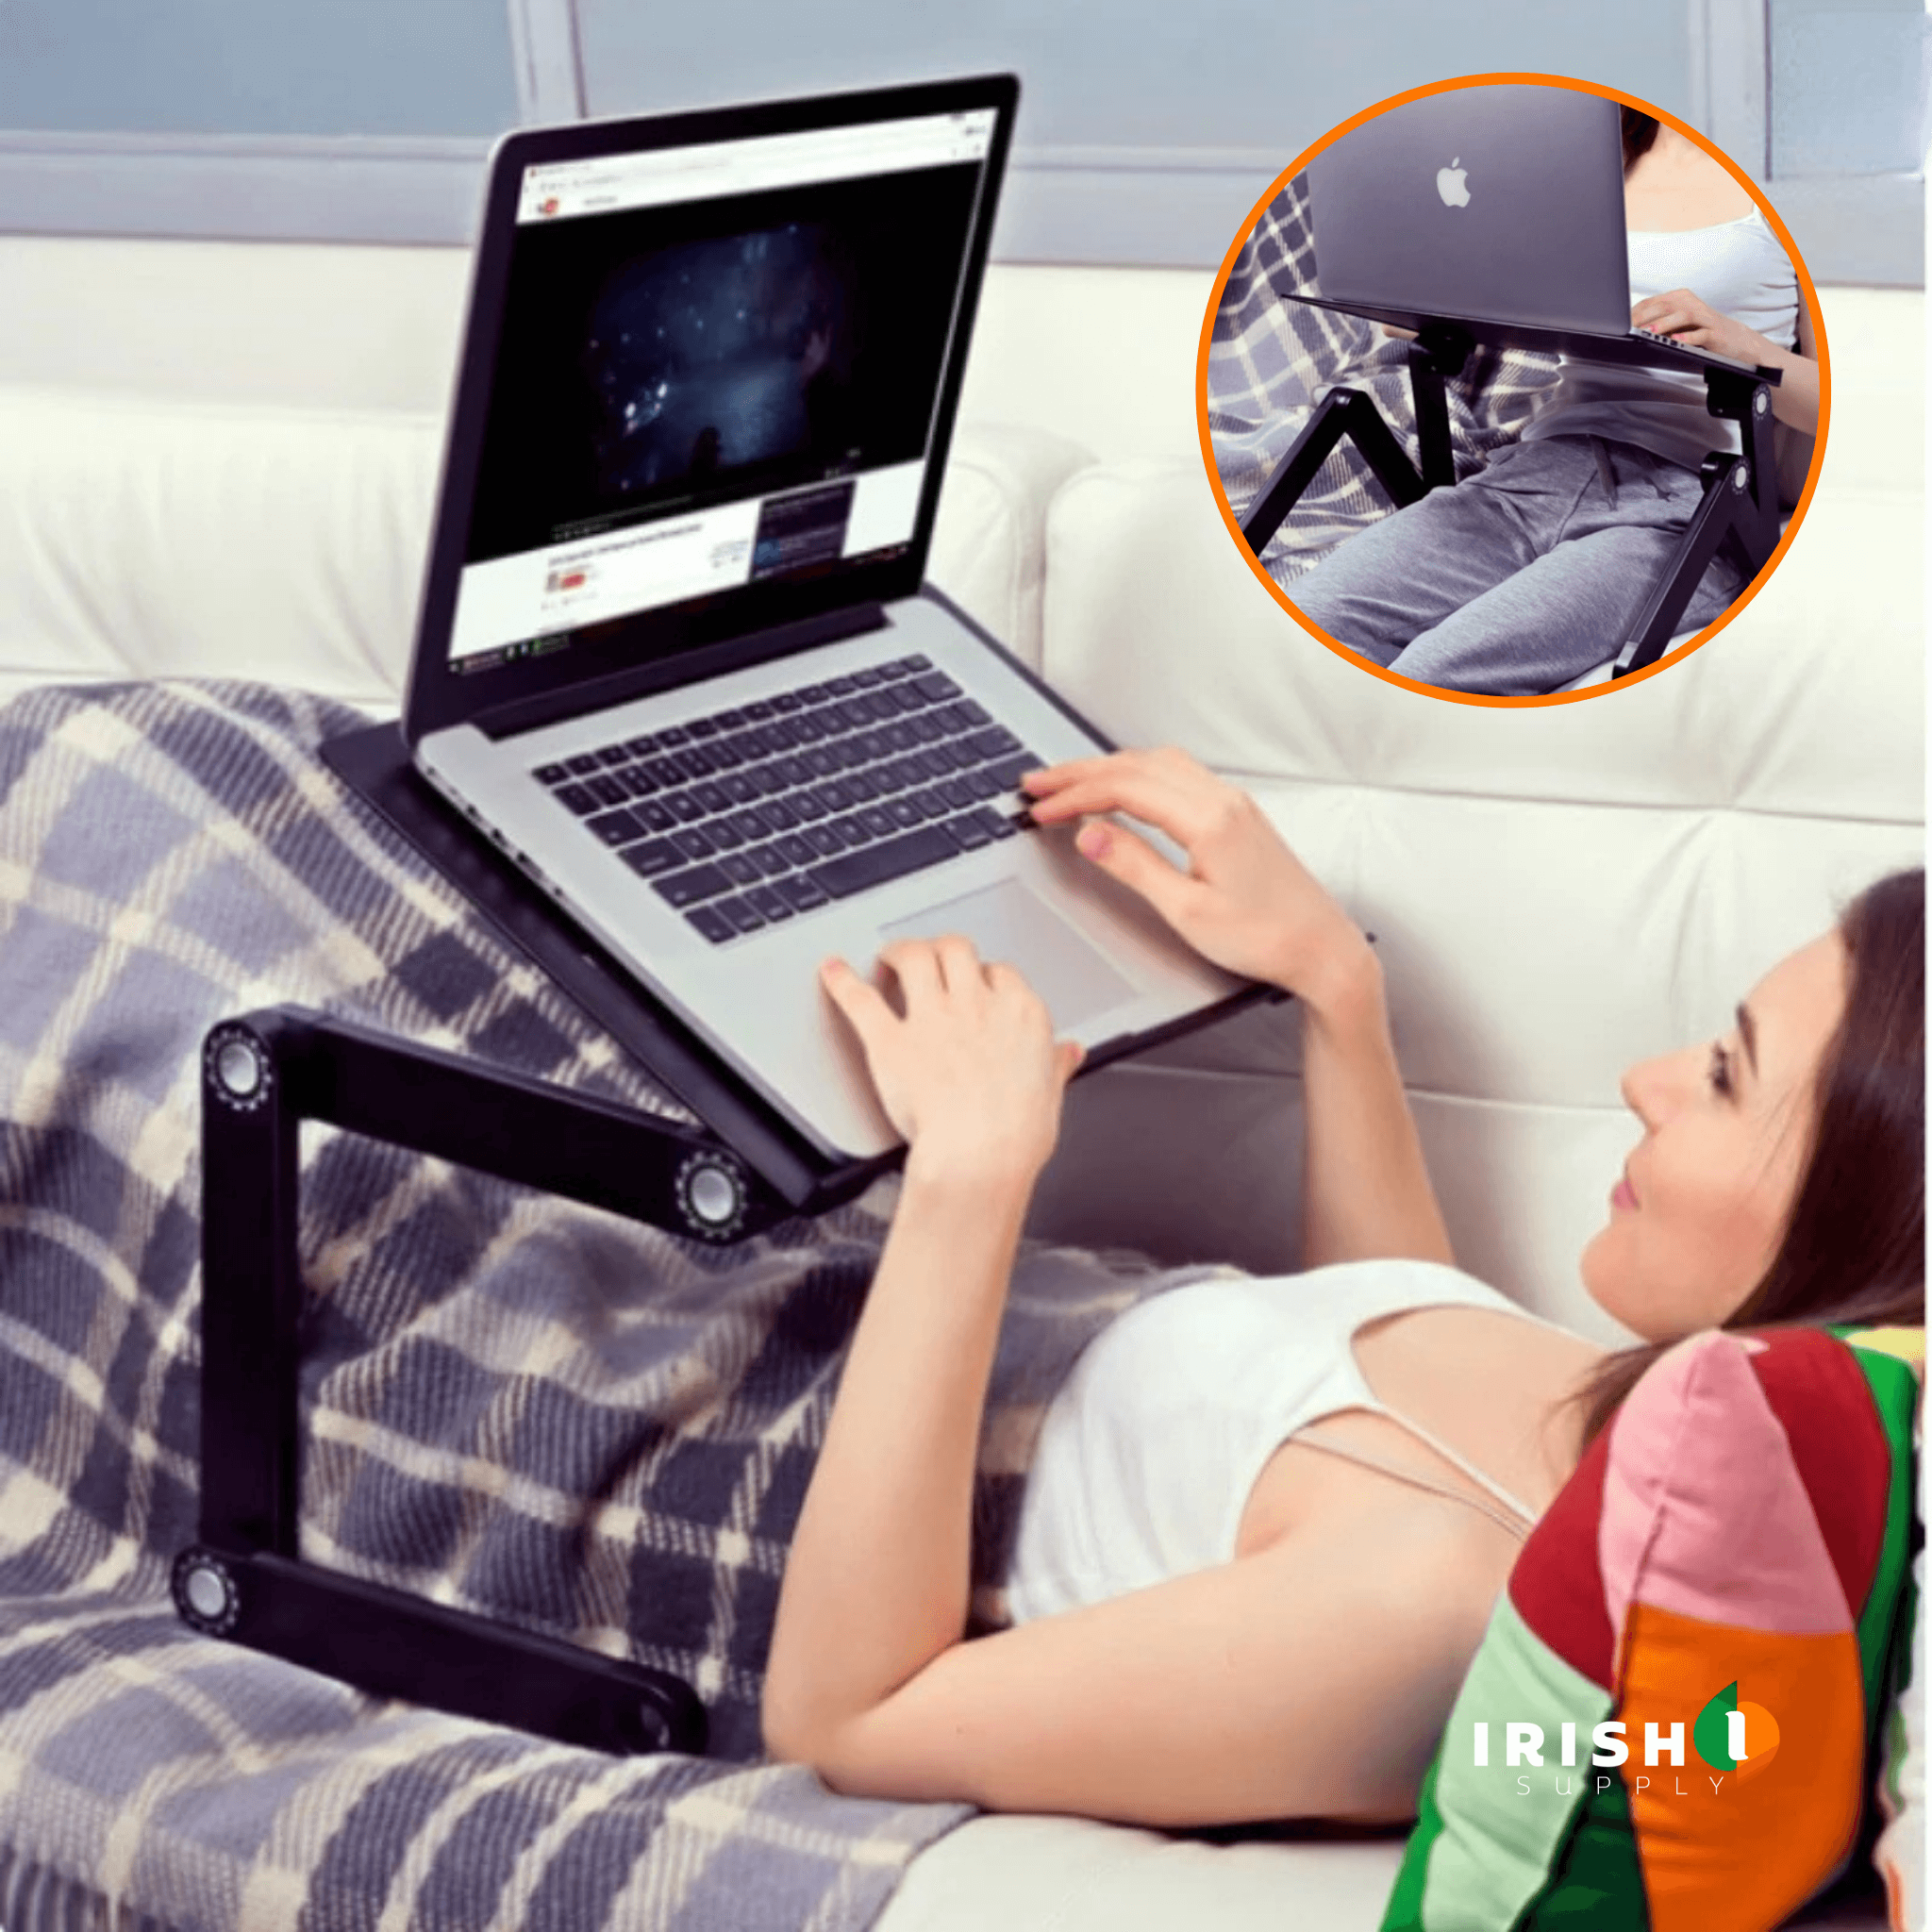 WORKMATE Adjustable Laptop Table With Mouse Pad